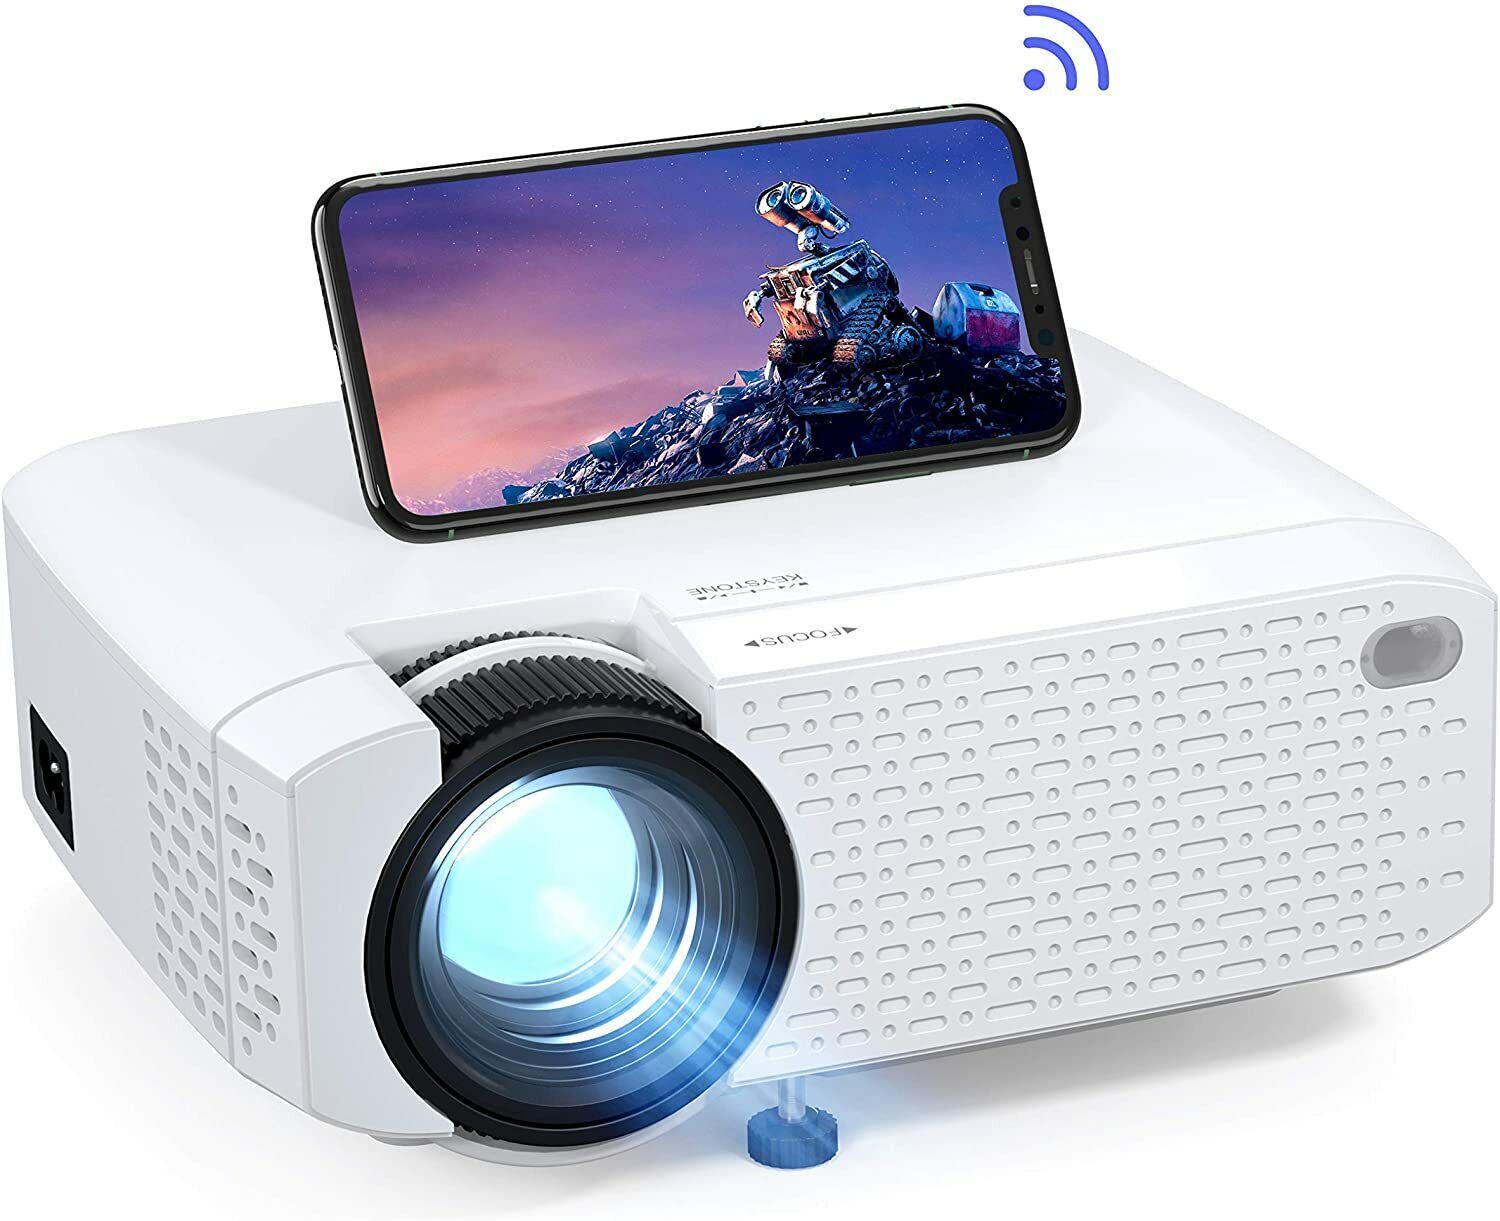 How Do I Connect My Projector To Wi-Fi